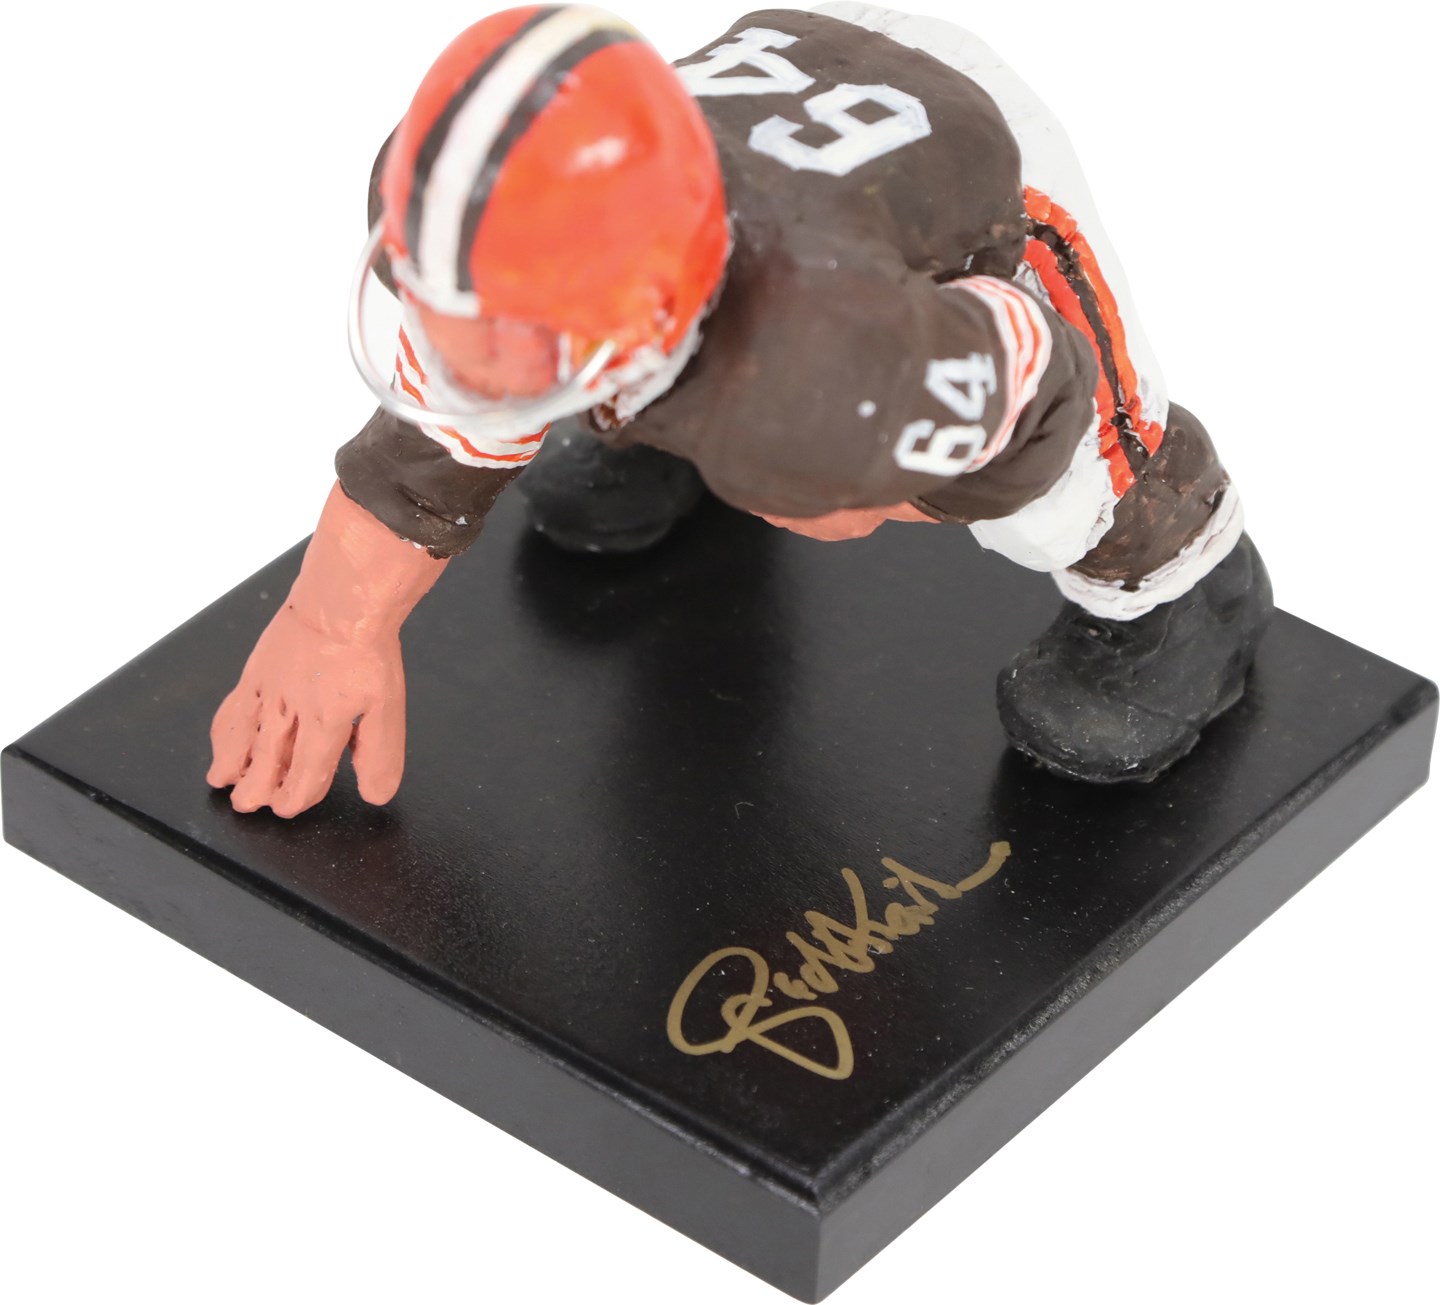 - 1964 Clevland Browns Mini-Statue by Fred Kail